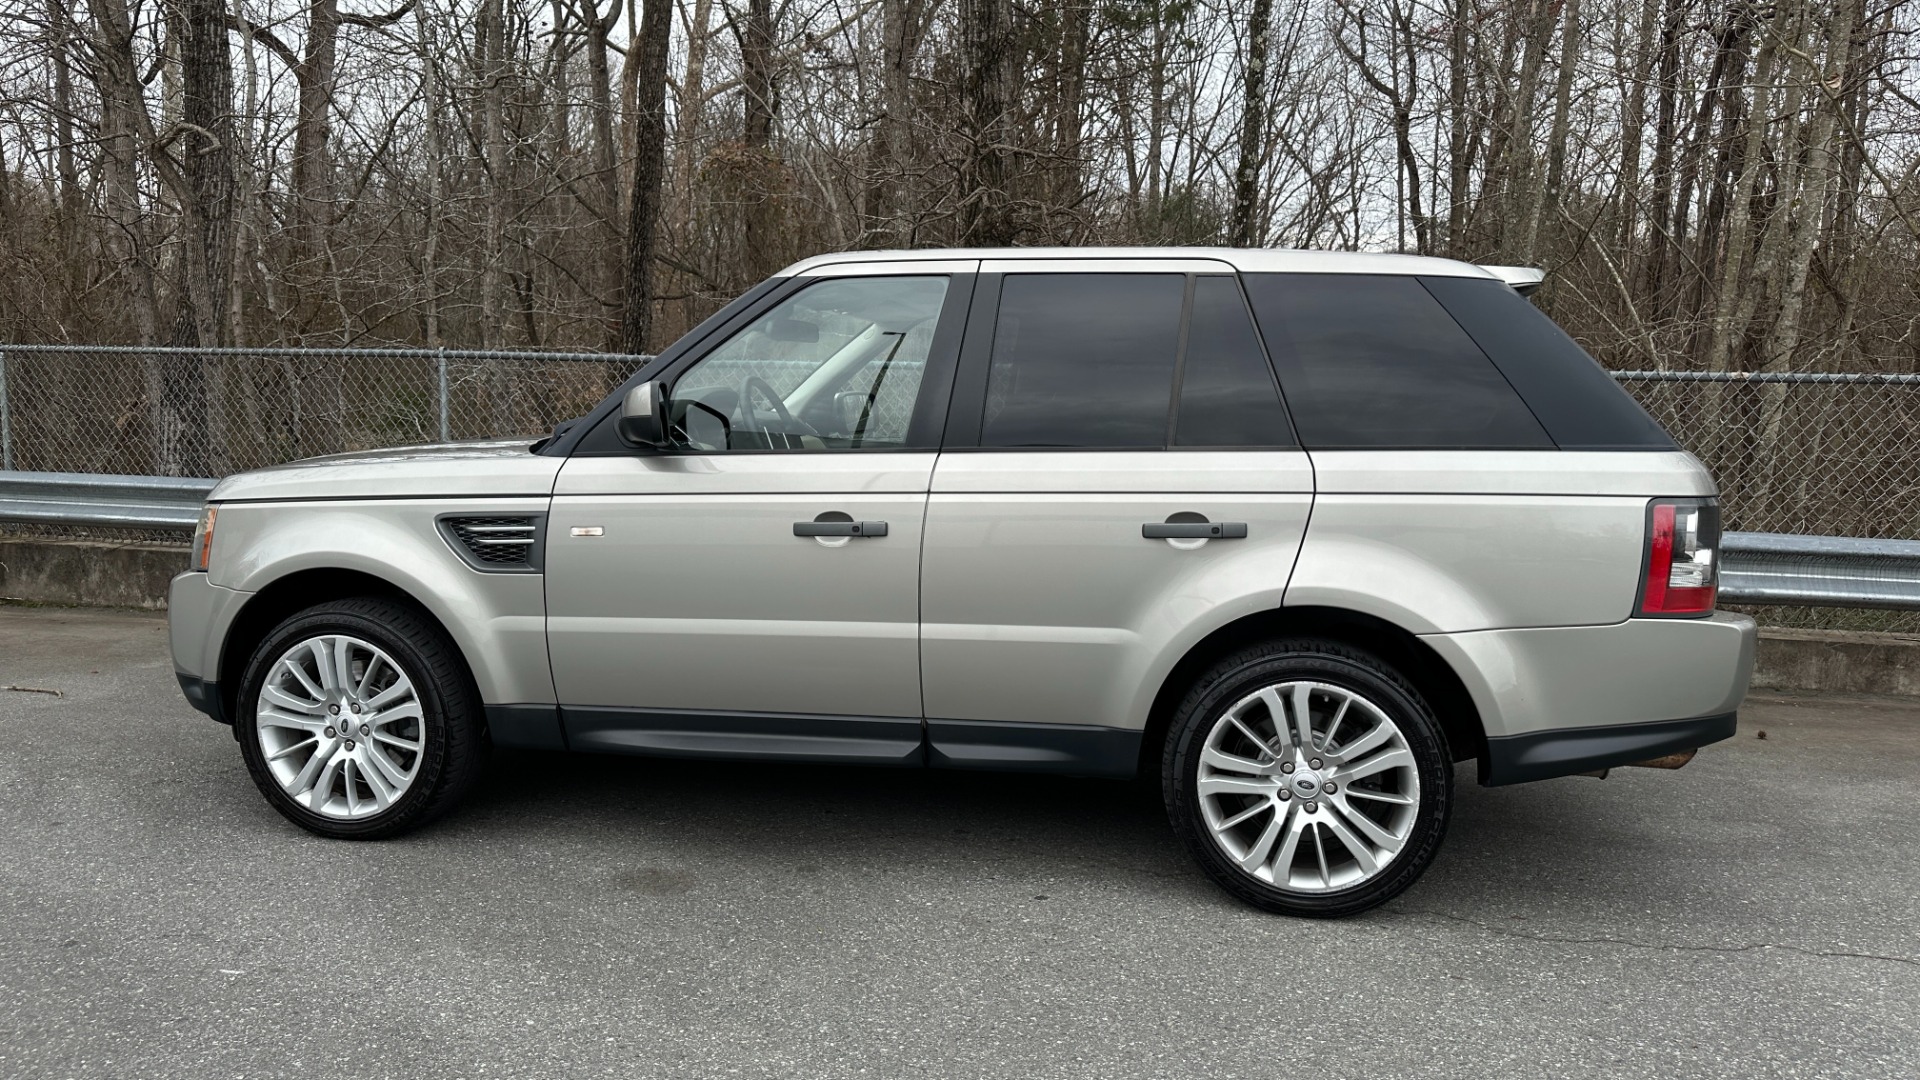 Used 2011 Land Rover Range Rover Sport HSE LUX / LEATHER / WOOD TRIM / LUXURY INTERIOR PKG / DIGITAL AND SAT RADIO for sale Sold at Formula Imports in Charlotte NC 28227 3